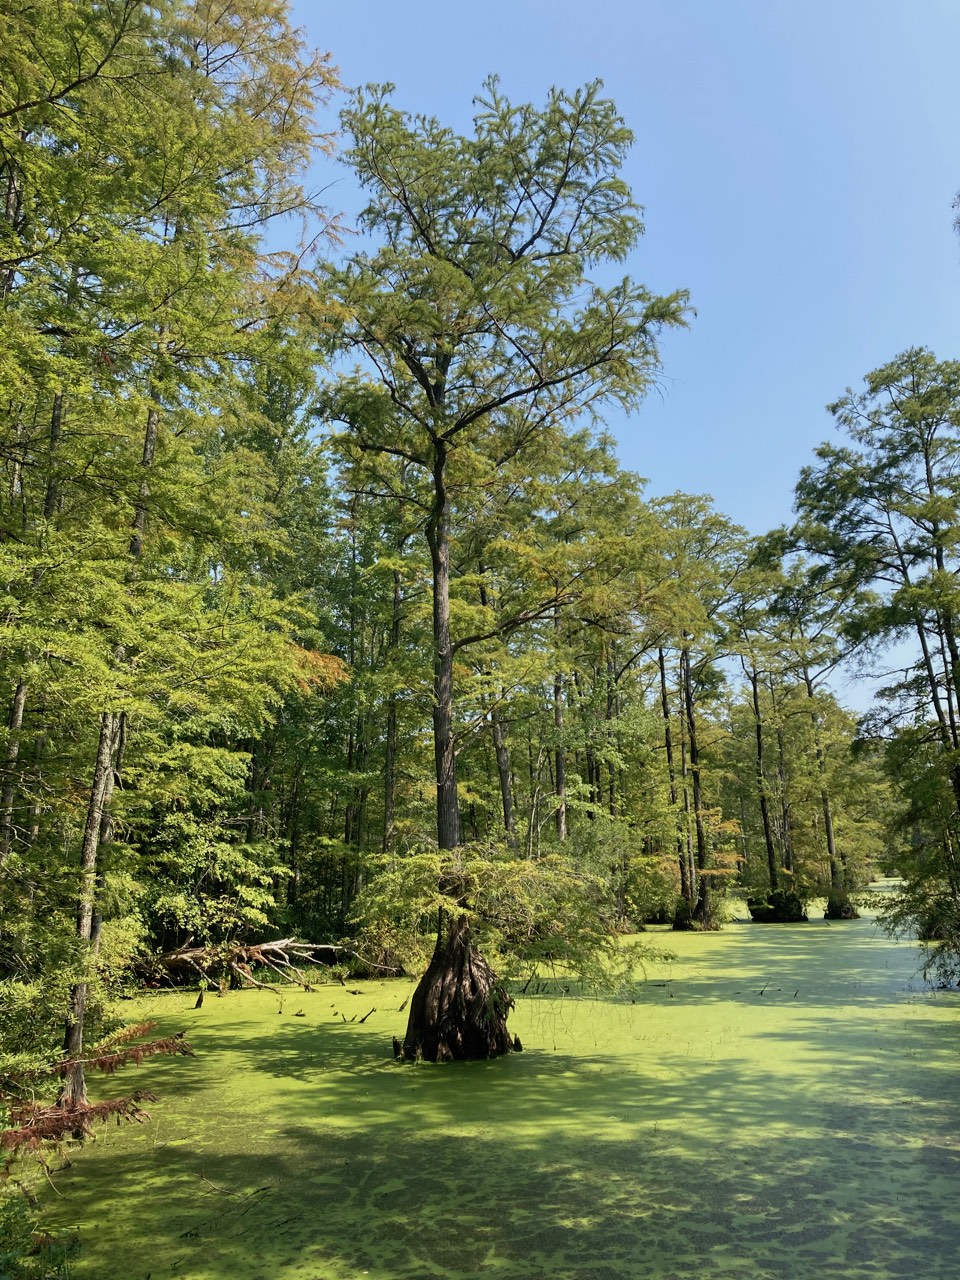 The Scientific Name is Taxodium distichum. You will likely hear them called Bald Cypress, Baldcypress, Swamp Cypress. This picture shows the Merchants Millpond State Park of Taxodium distichum